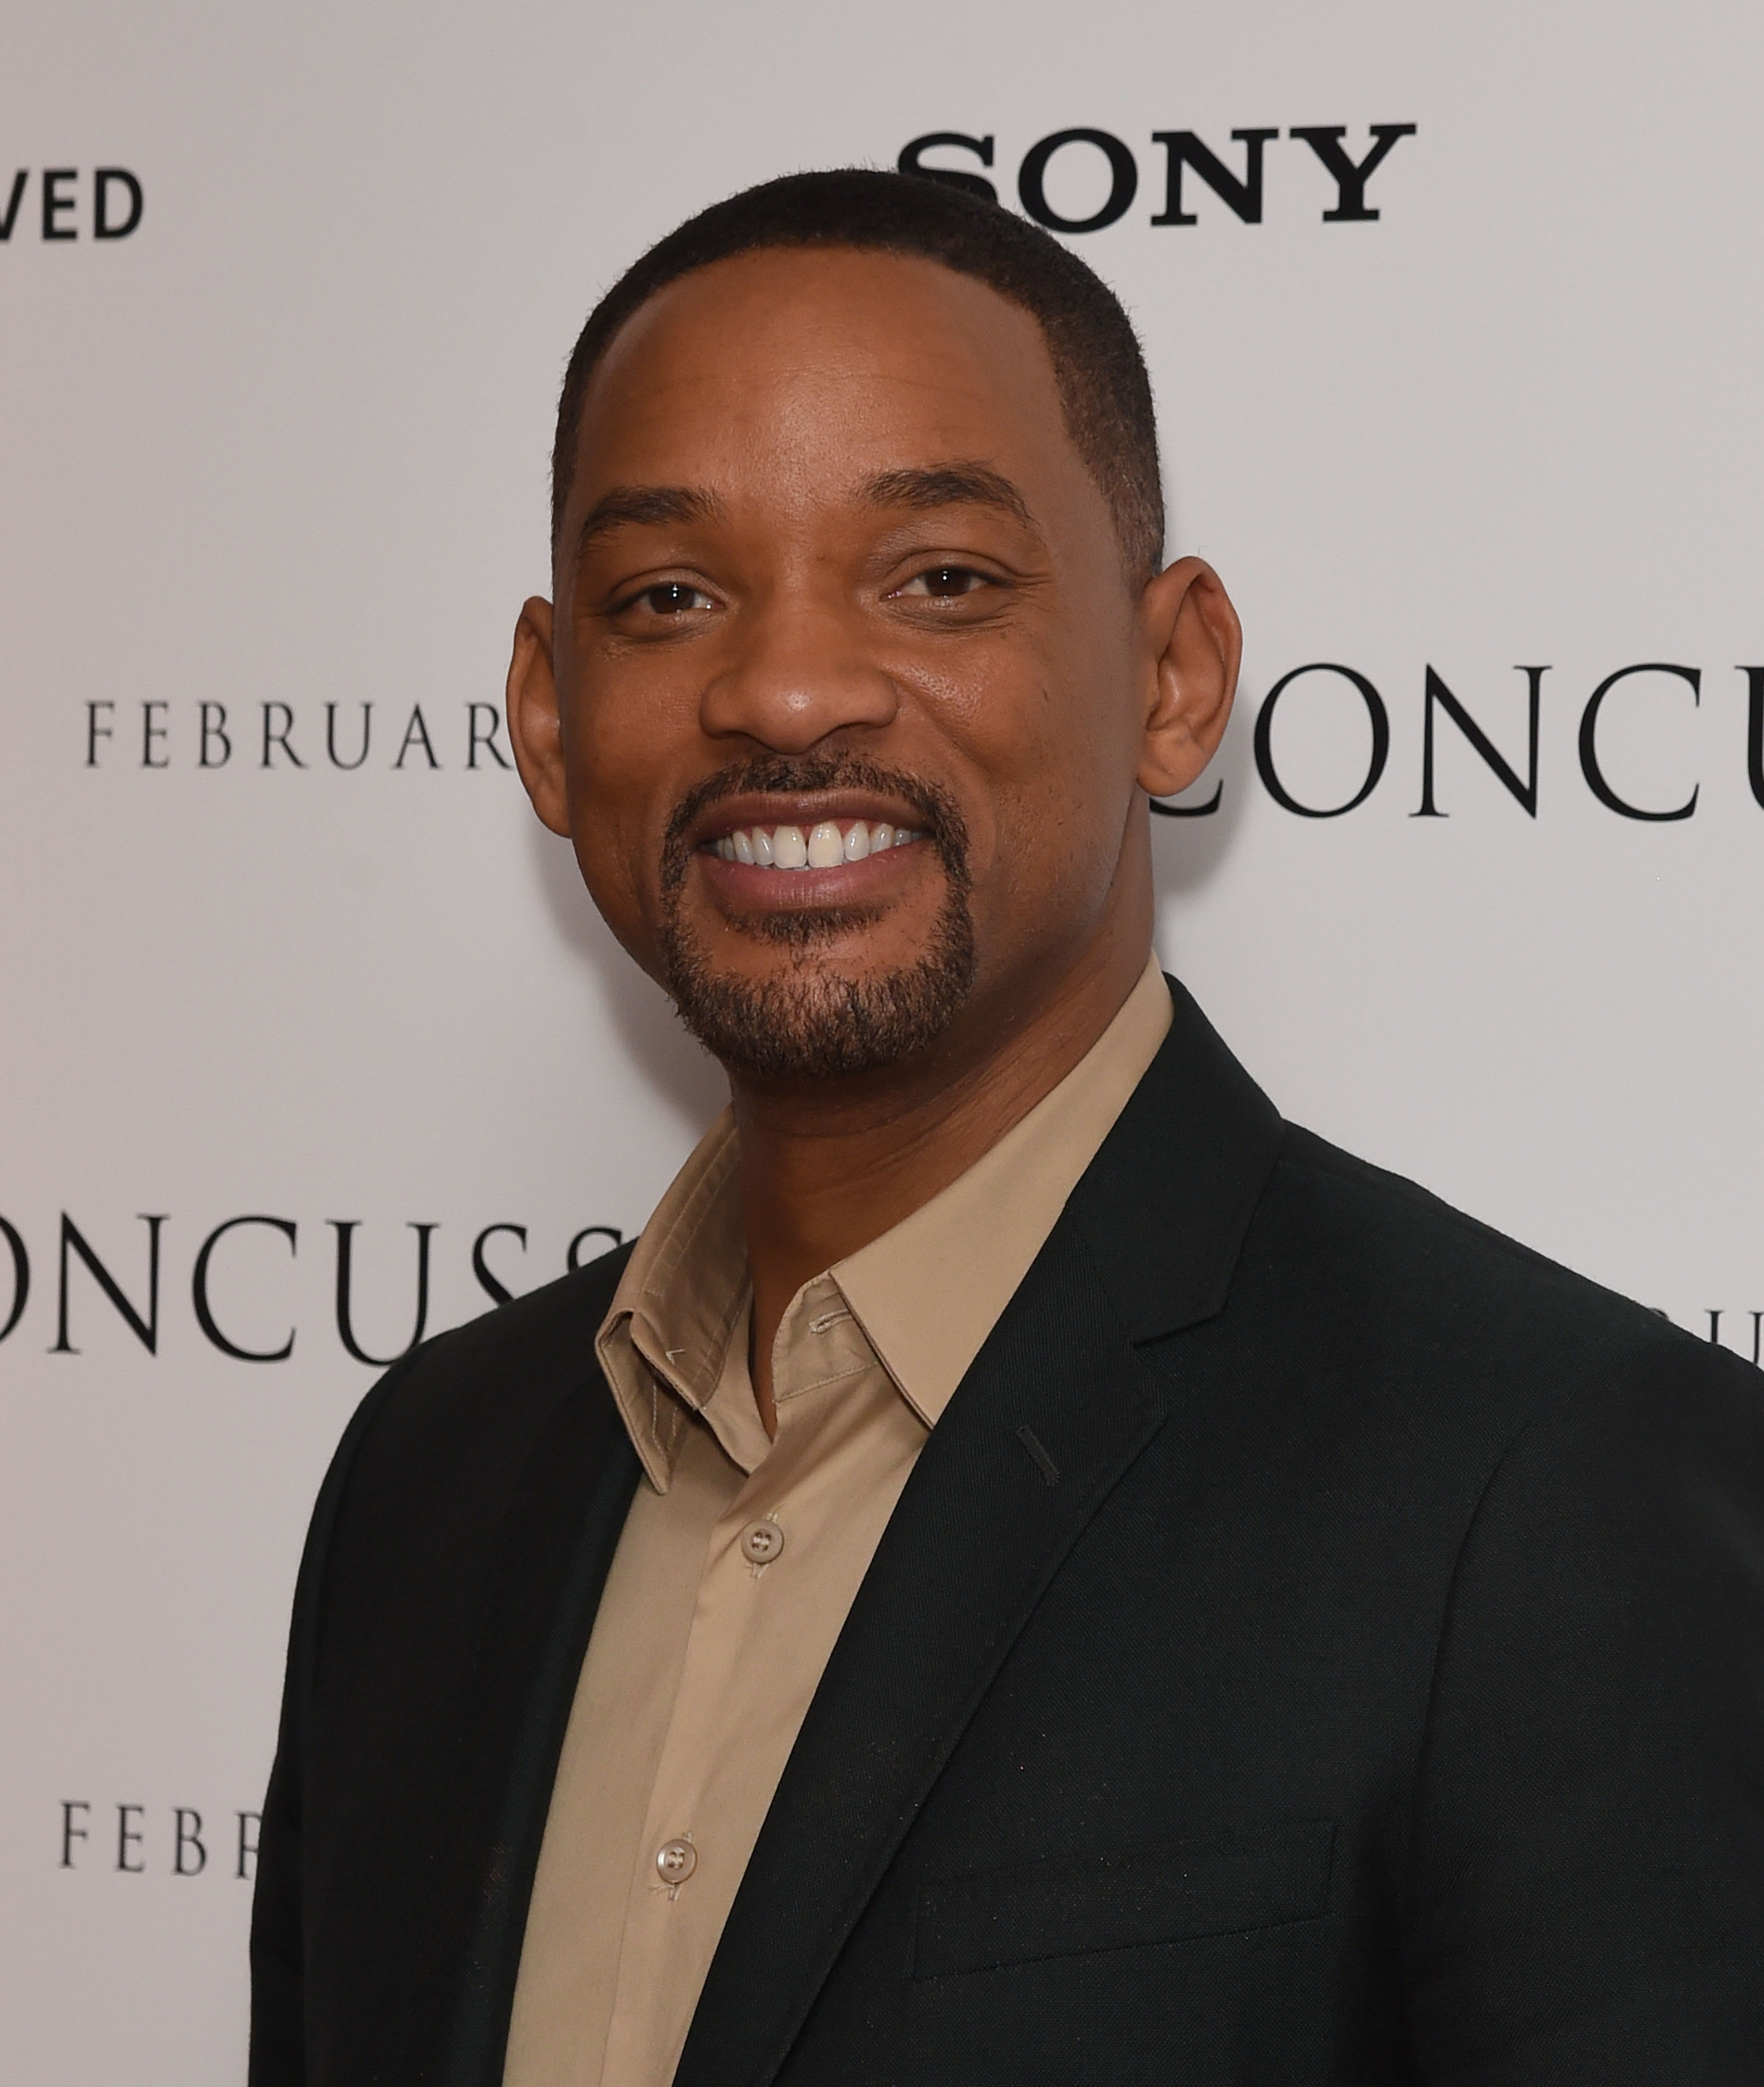 Will Smith attends a special screening of "Concussion" hosted by Will Smith, Susanna Reid and Brian Moore at The Ham Yard Hotel on January 28, 2016 in London, England. (David M. Benett—WireImage)